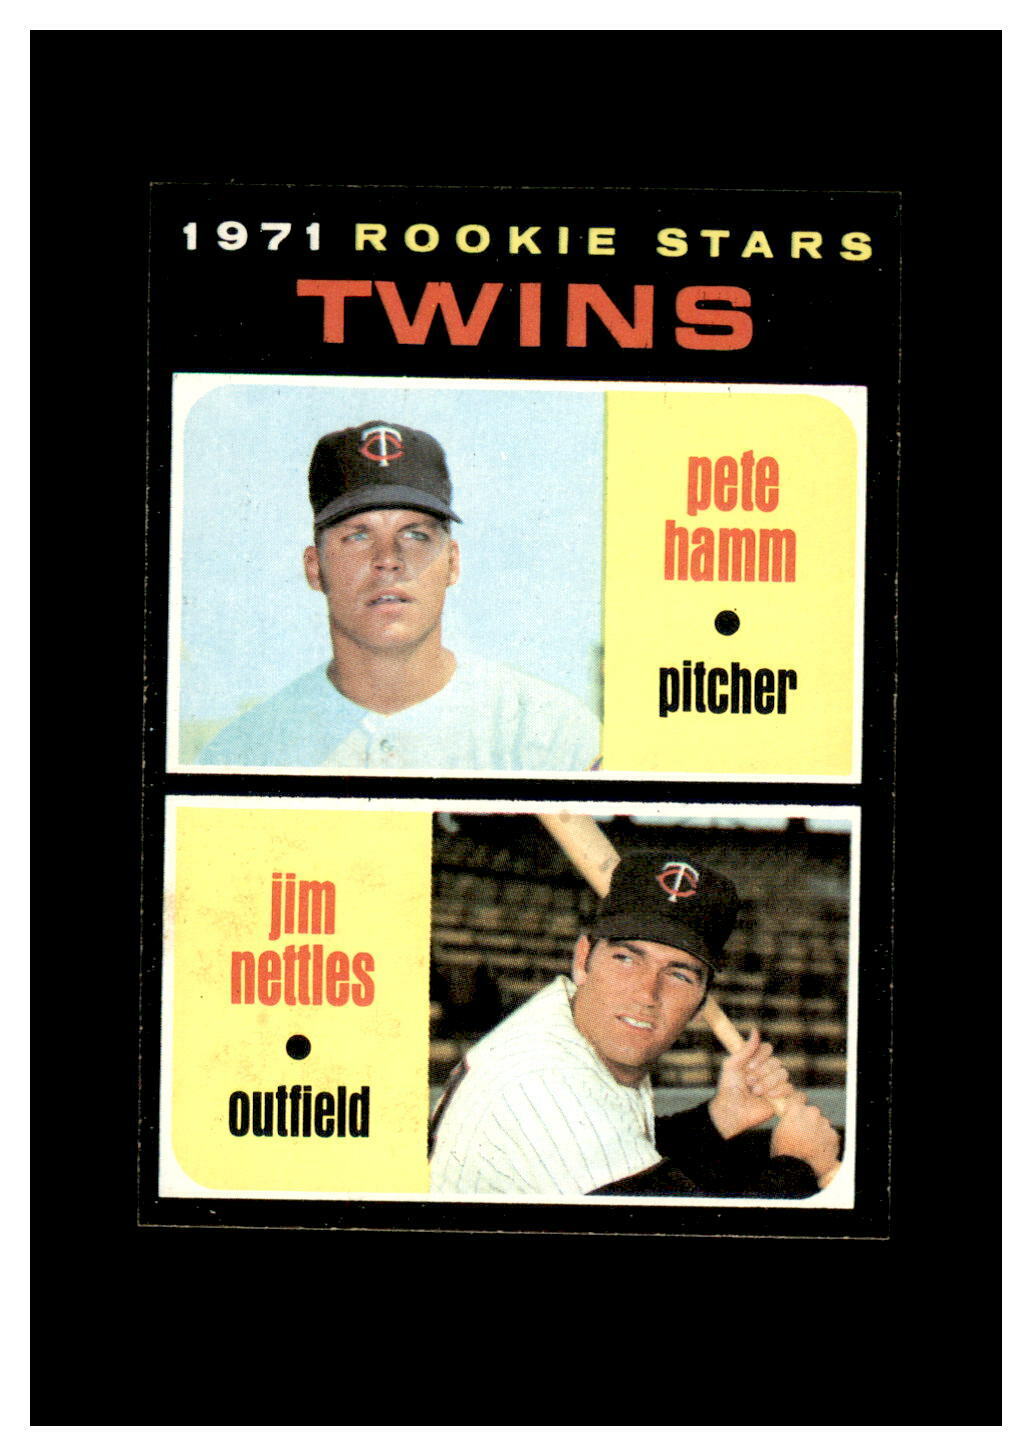 1971 Topps Set Break # 74 Twins Rookies NM-MT OR BETTER *GMCARDS*